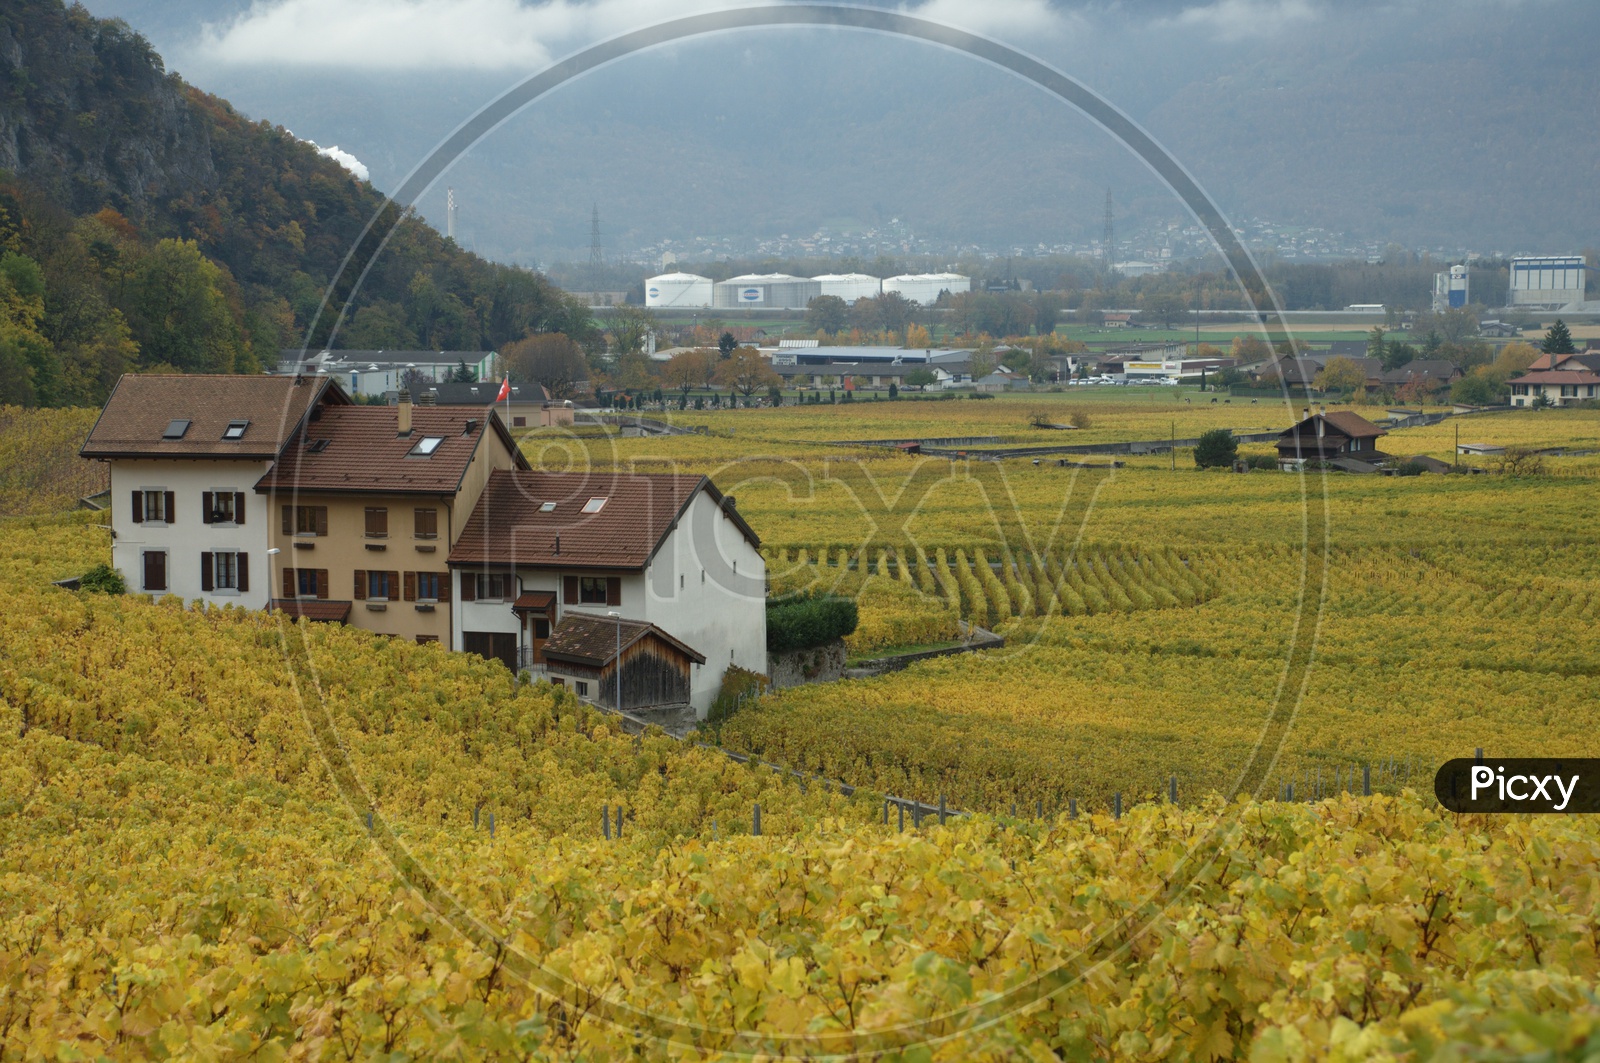 A House with yellow plants around and mountains in the background. Vineyard.